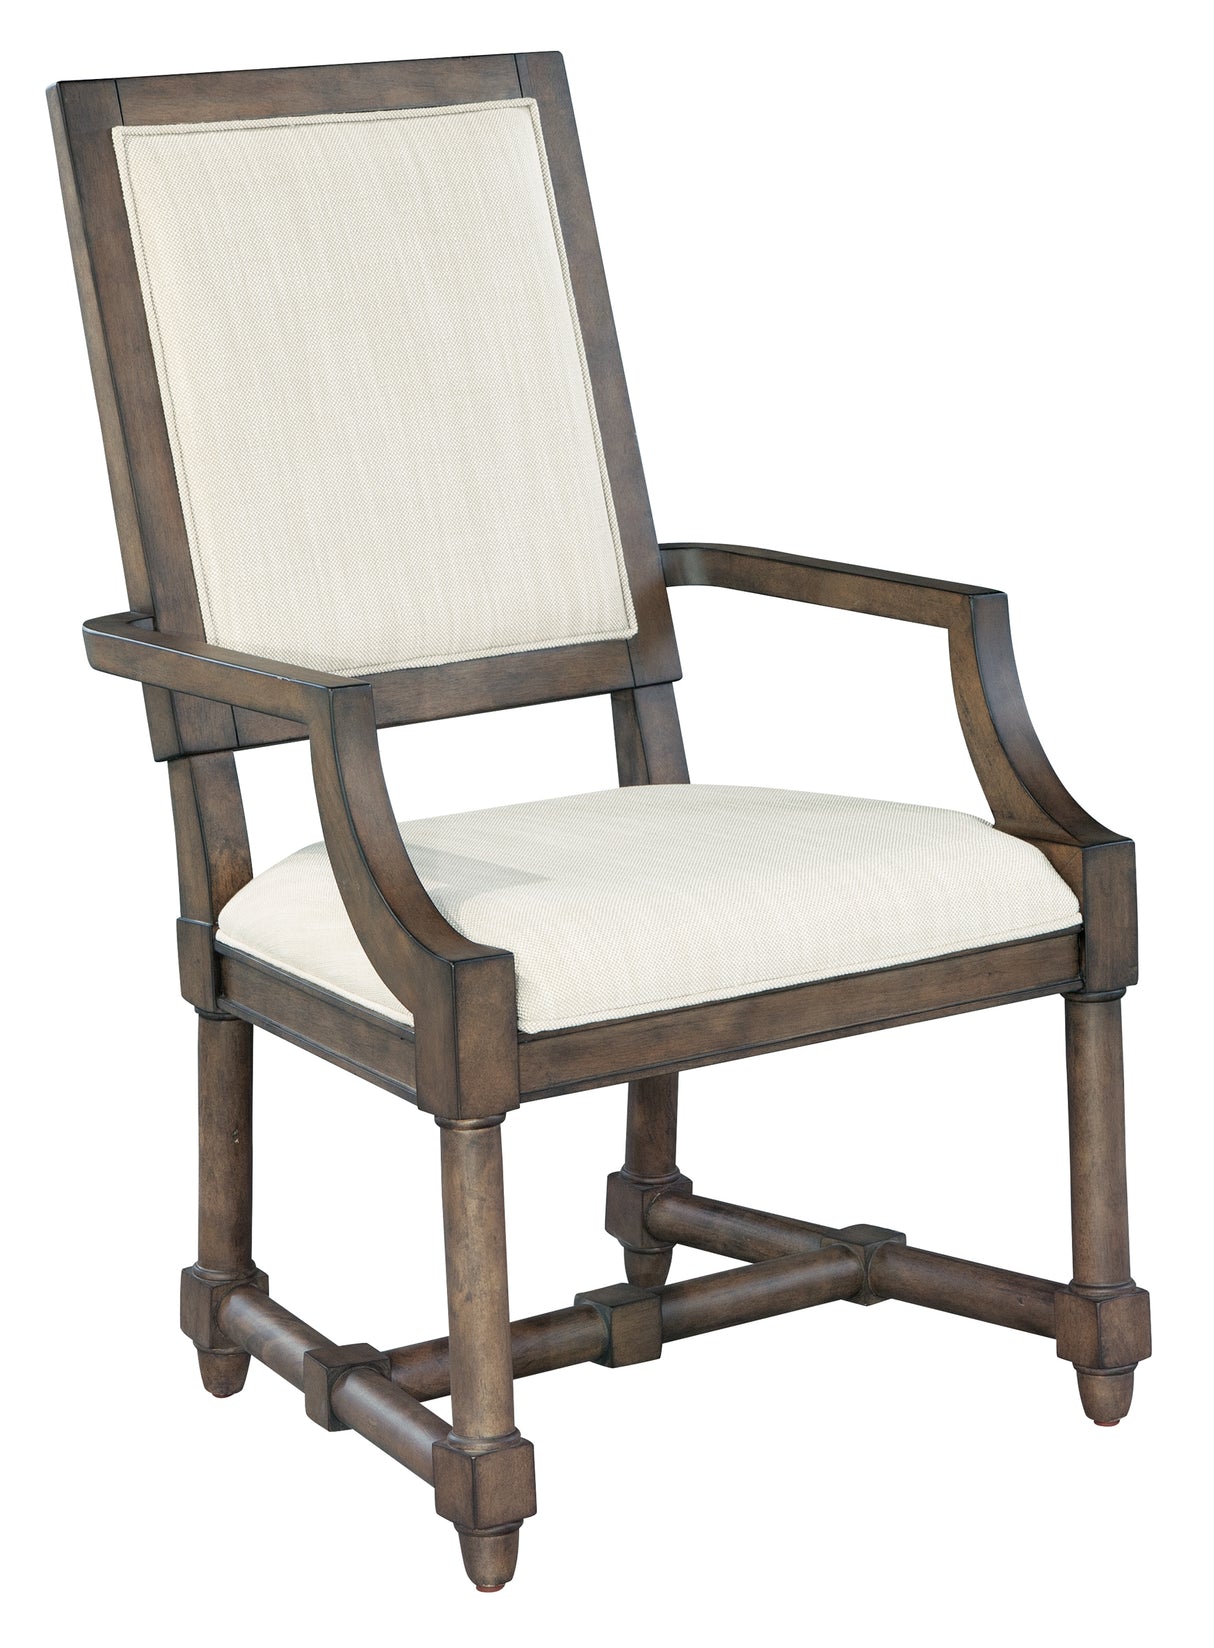 Hekman 23522 Lincoln Park 25in. x 25.75in. x 42in. Upholstered Dining Arm Chair